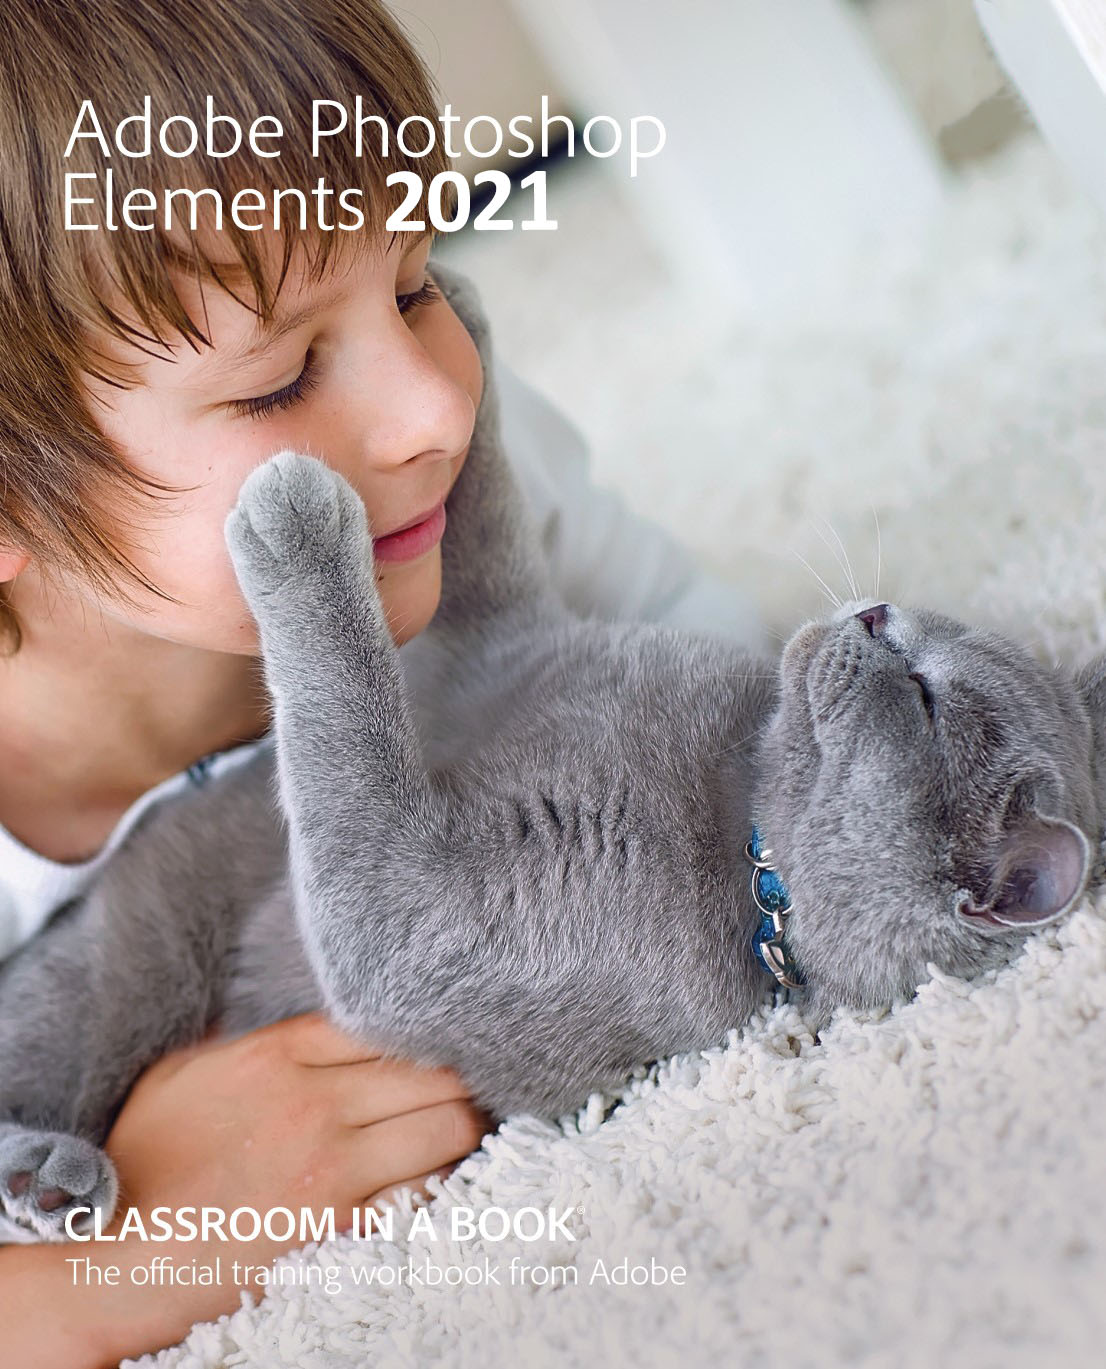 Features of Photoshop Elements 2021